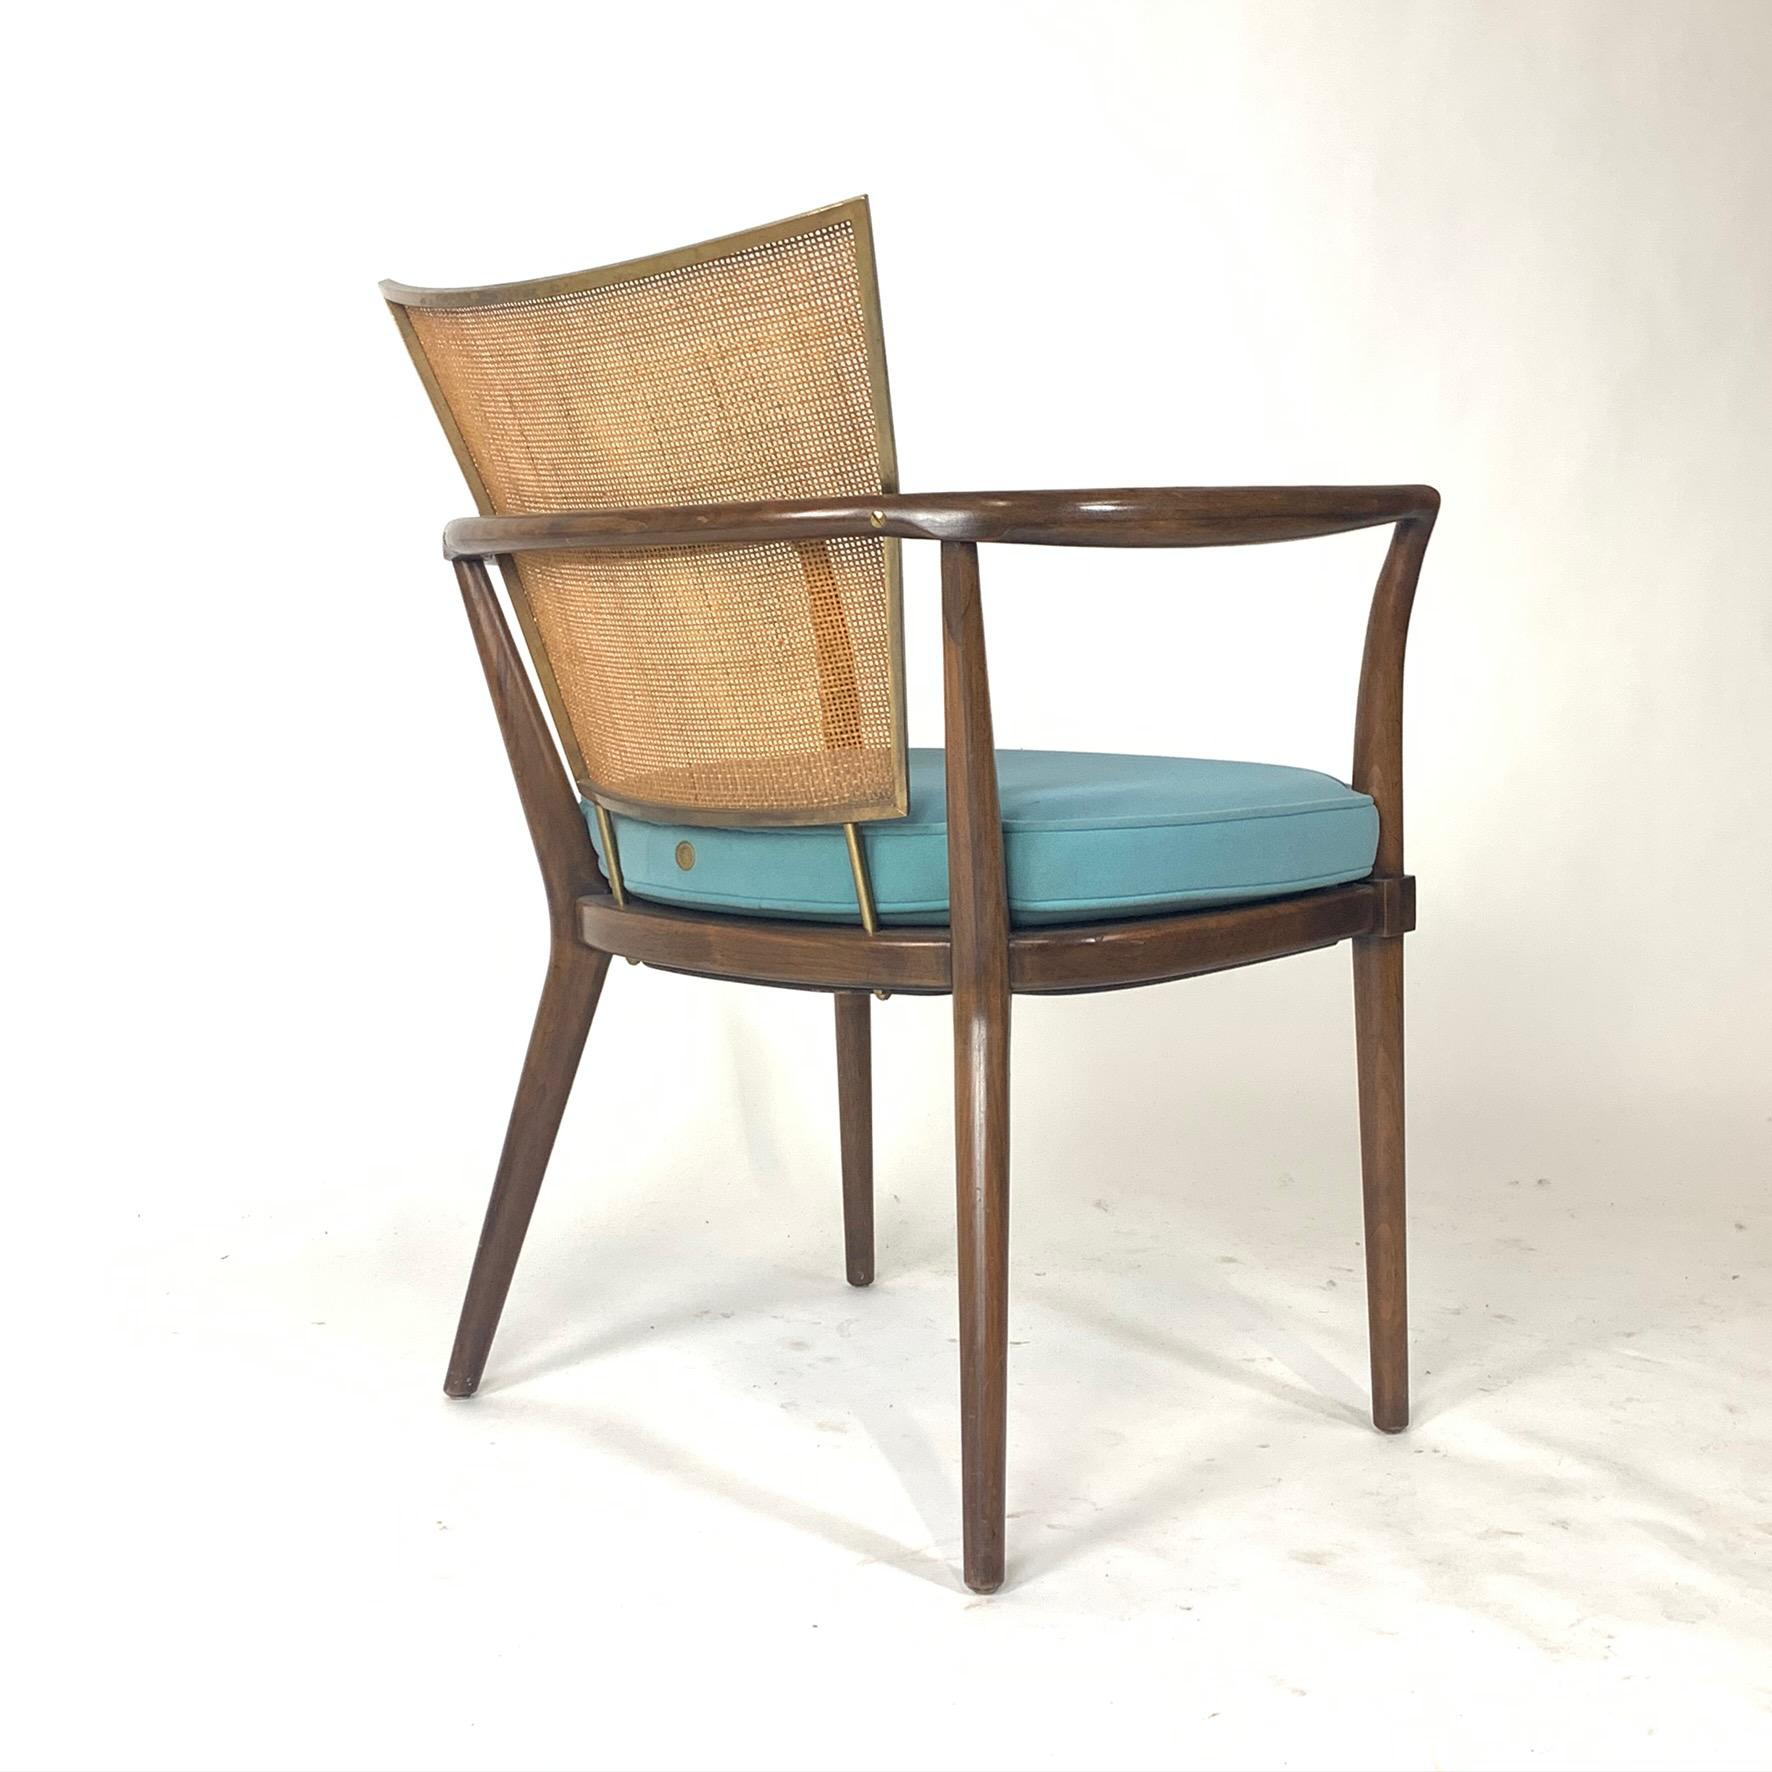 20th Century Pair of Sculptural Bert England Brass, Cane & Carved Walnut Arm or Dining Chairs